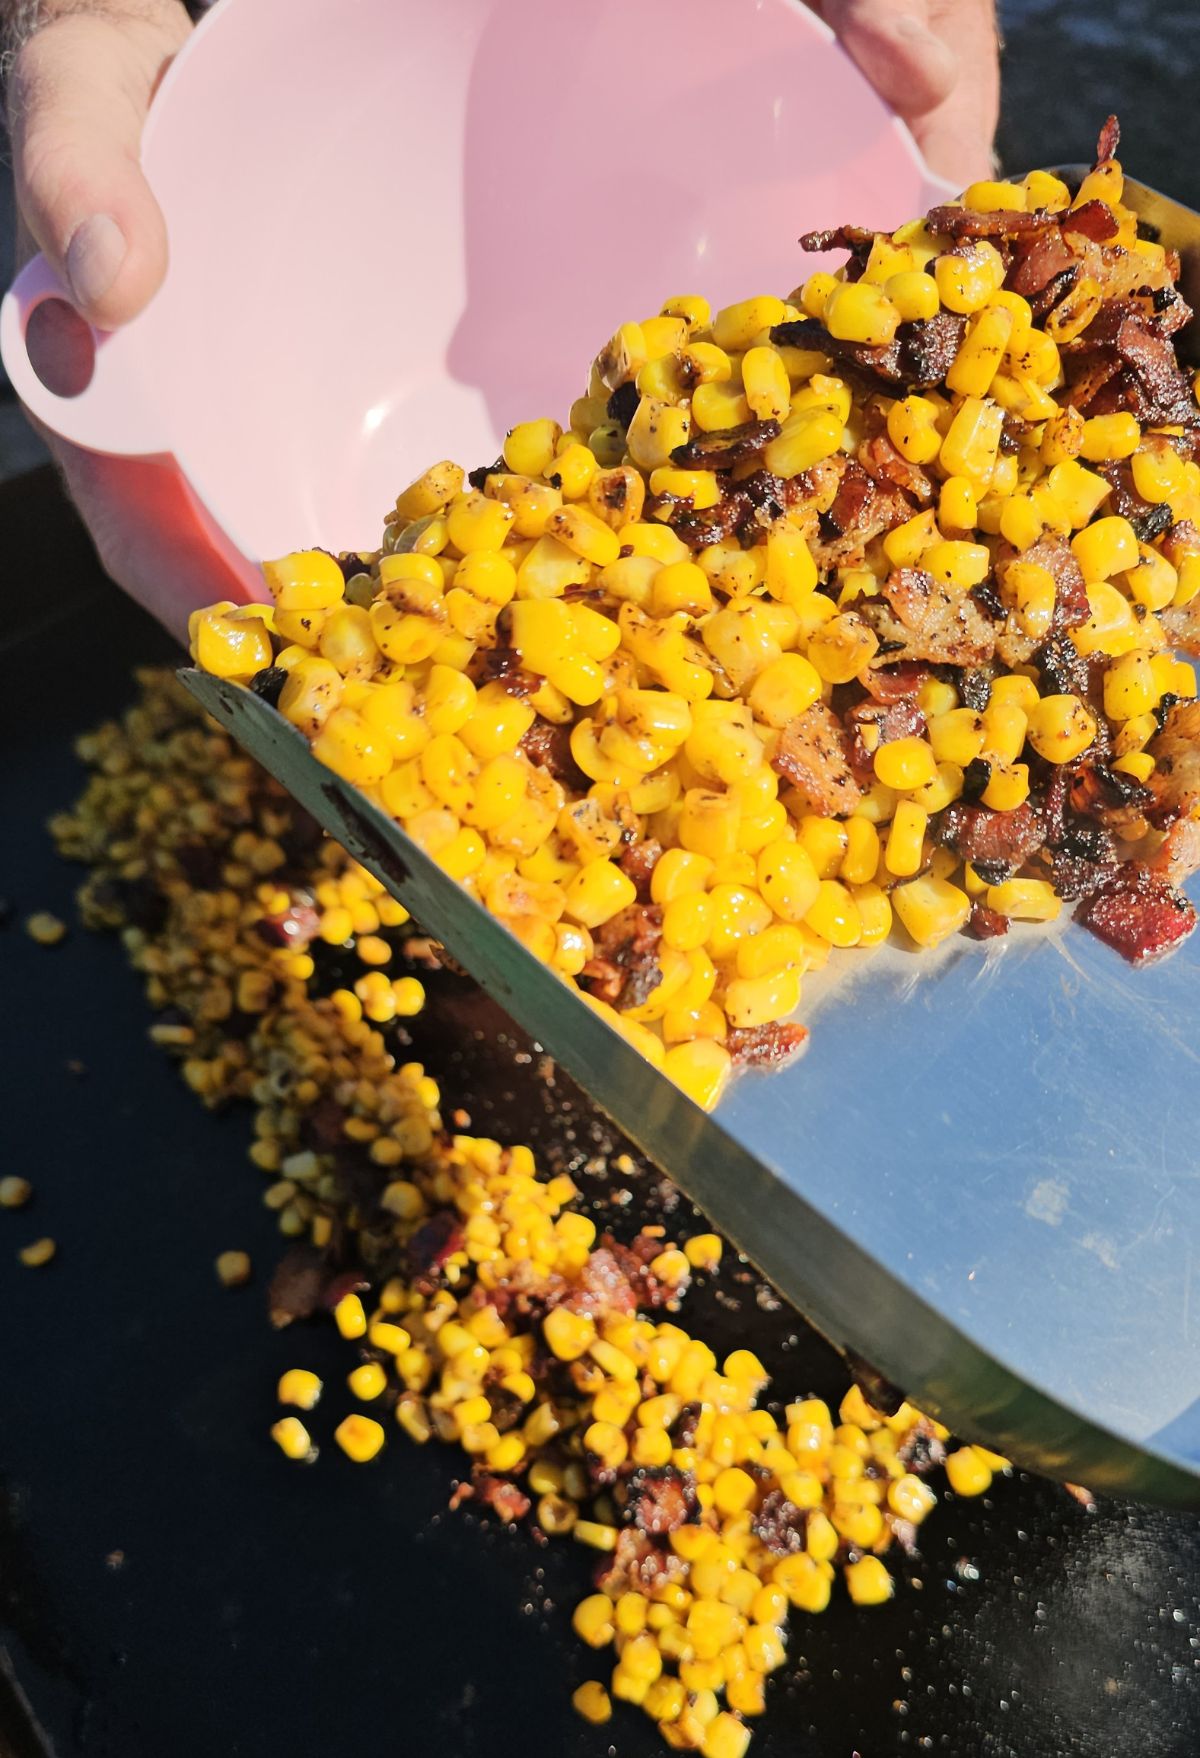 A person accidentally spills a mixture of corn and bacon from a pink bowl onto a cooking surface.